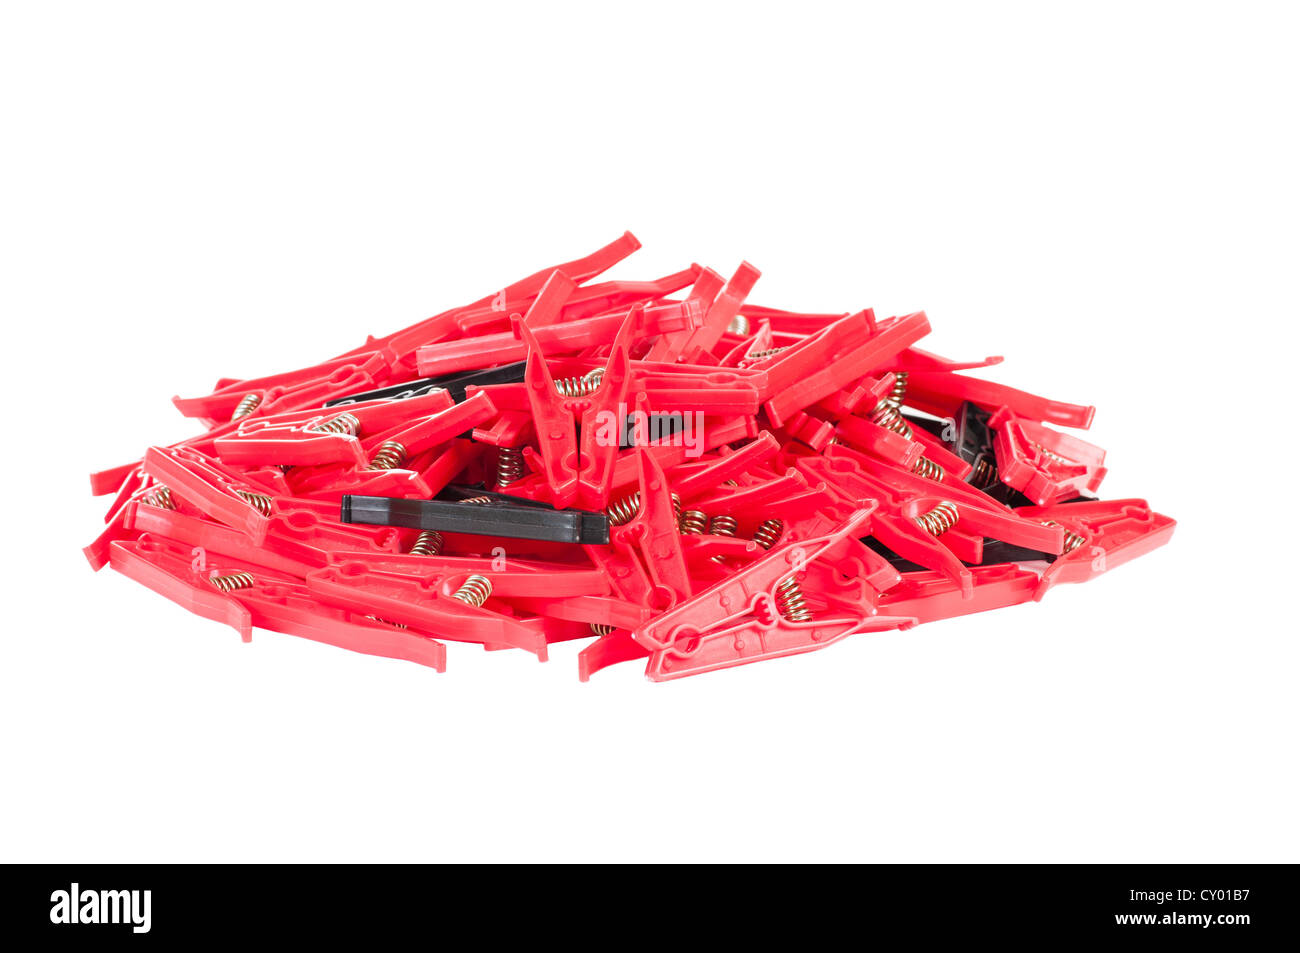 Clothes pegs on white background. Stock Photo